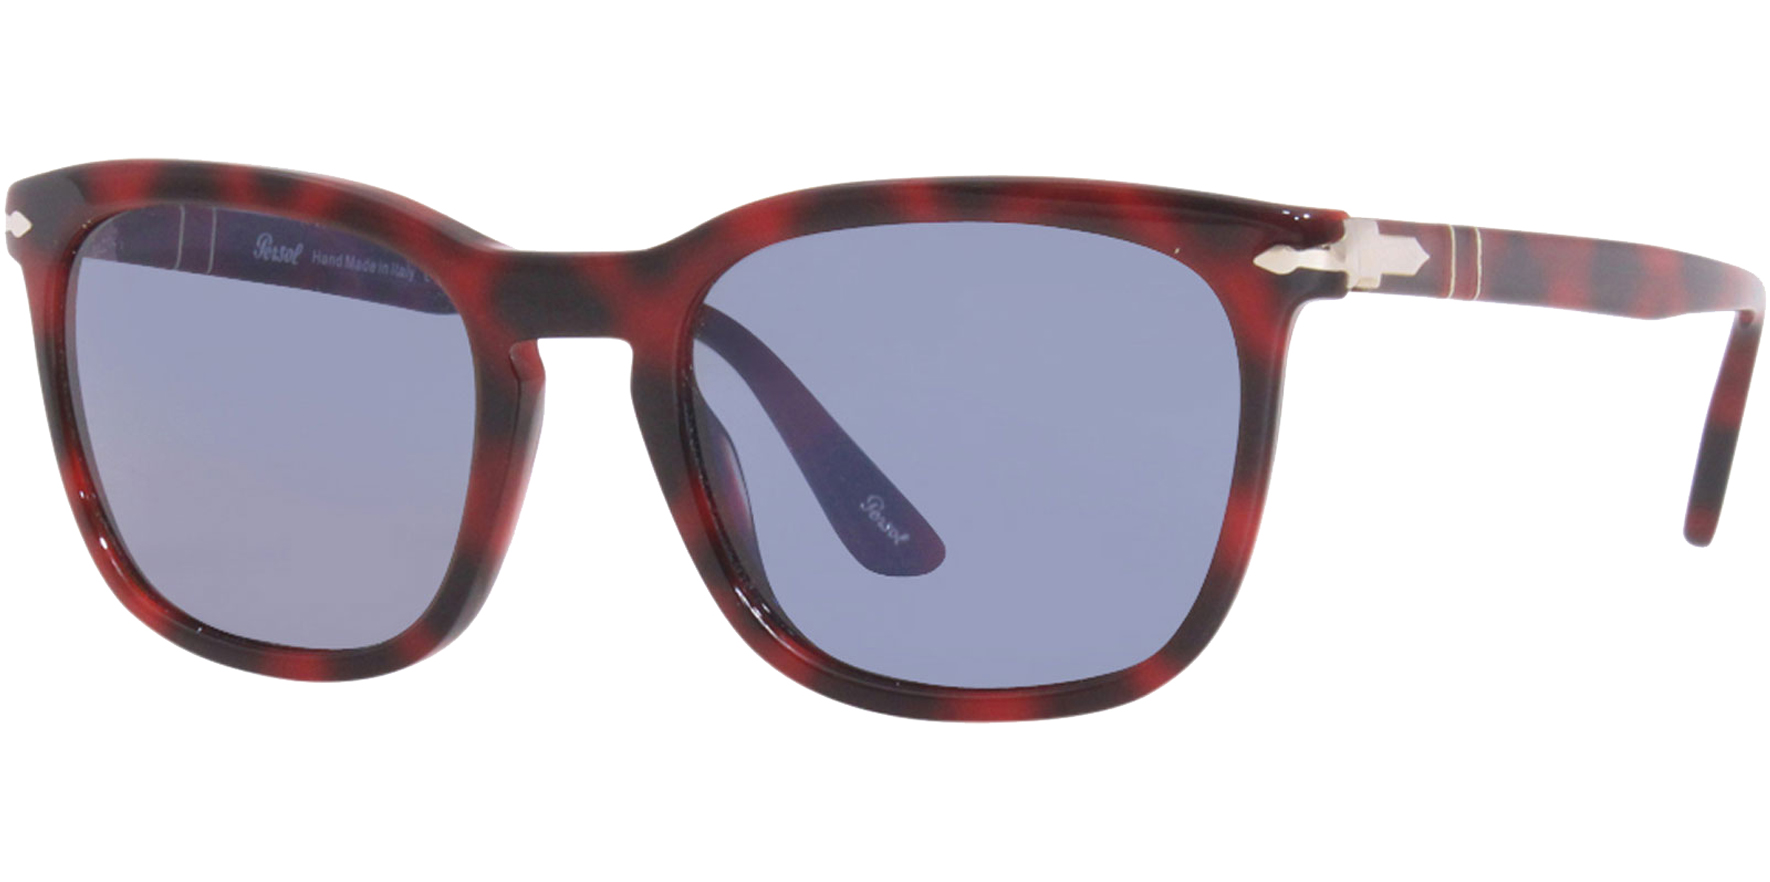 Persol Handmade Red Grid Soft Square w/ Glass Lens